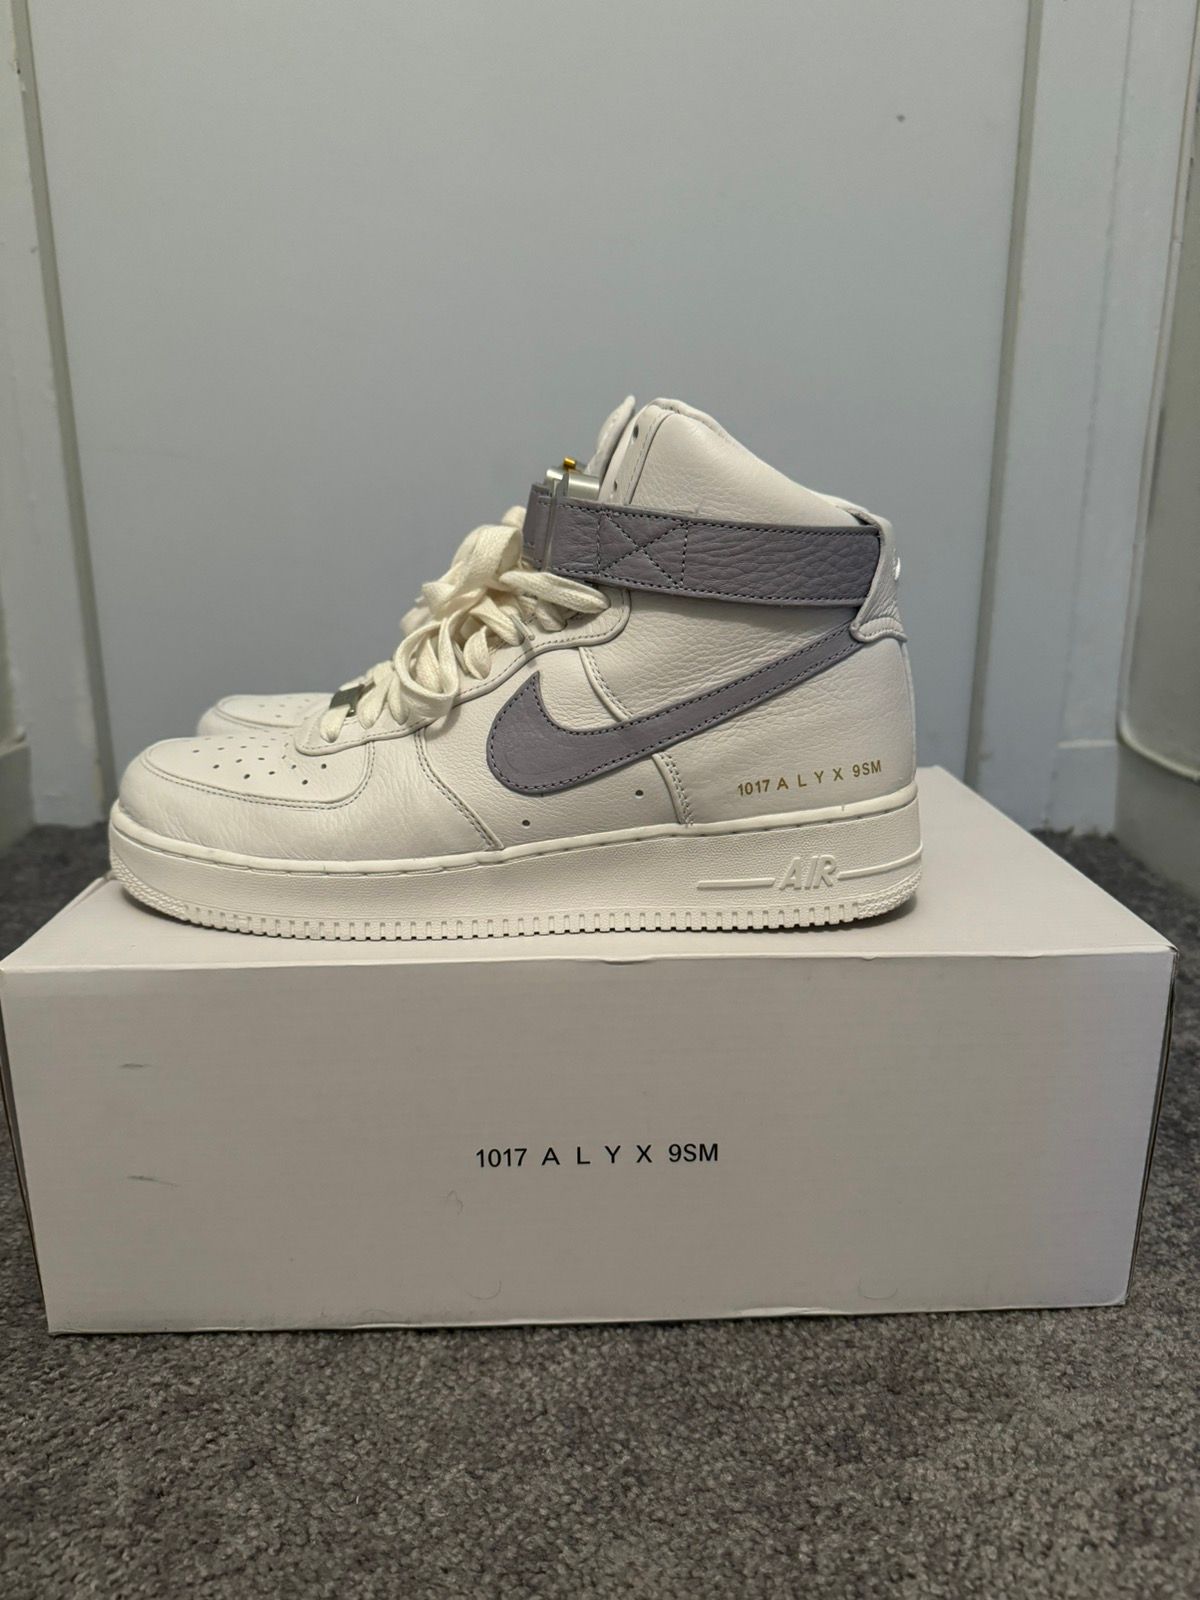 Pre-owned 1017 Alyx 9sm X Alyx 1017 Alyx Nike Air Force 1 High Shoes In White